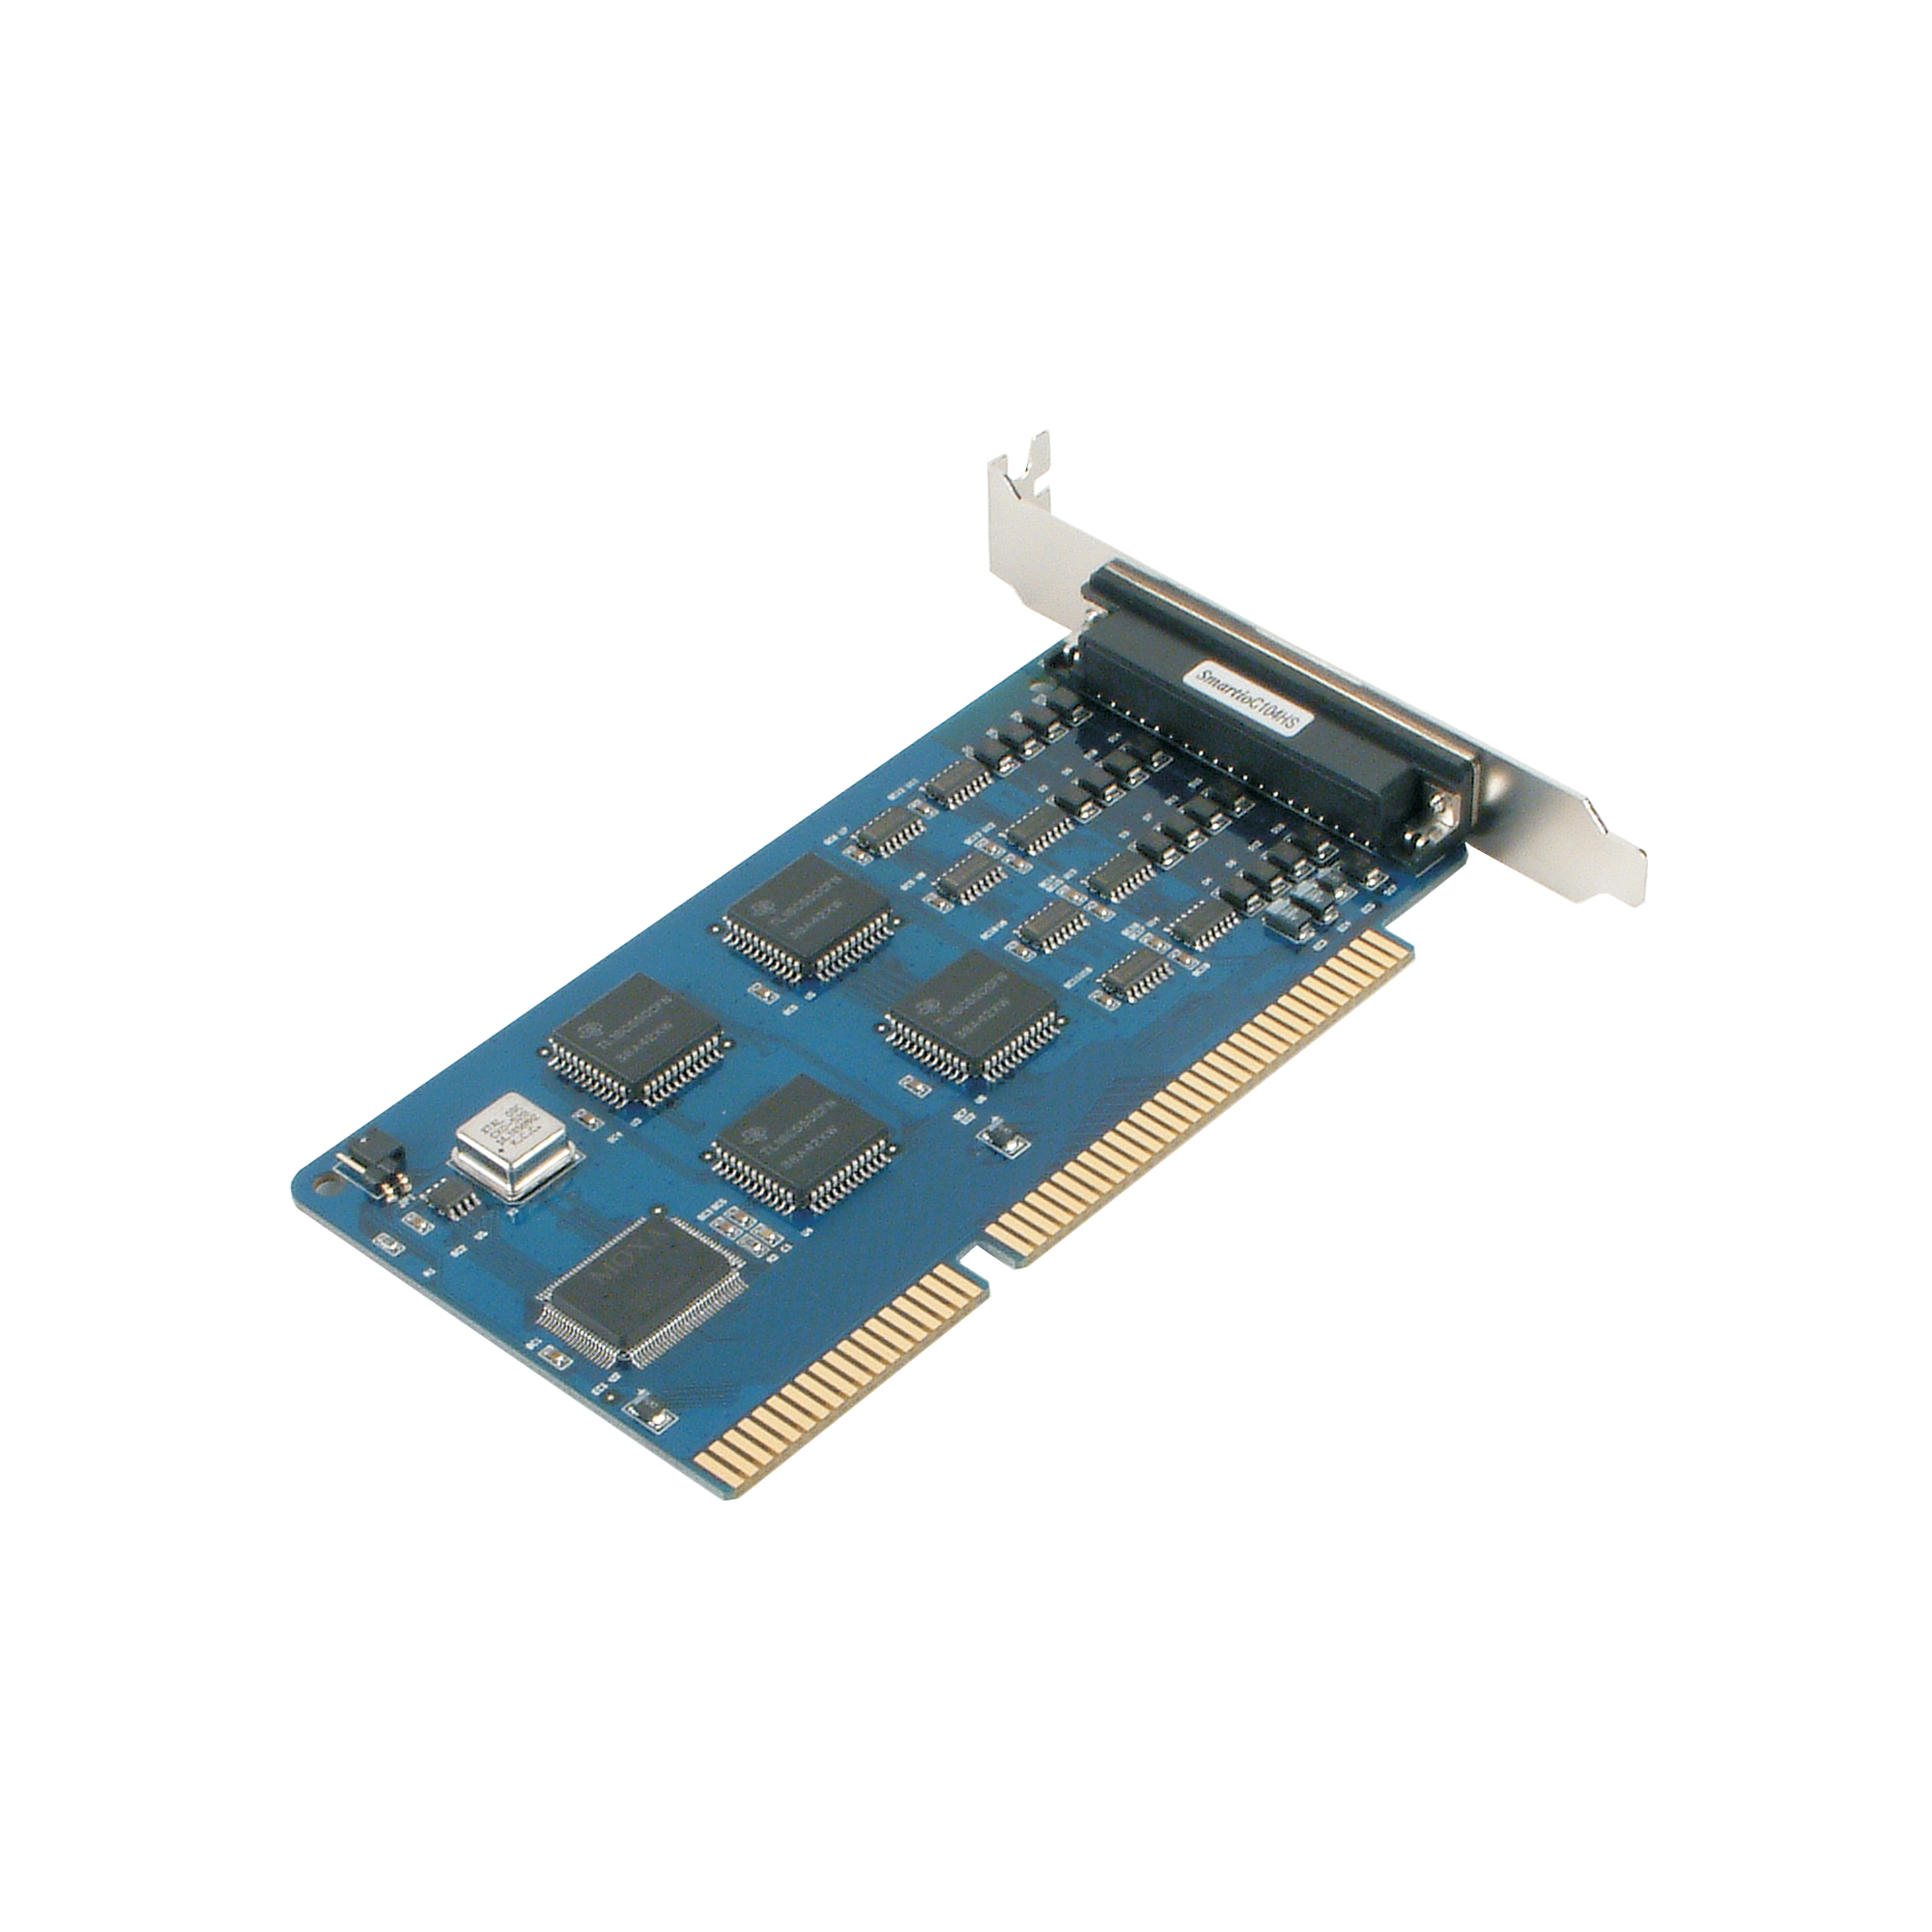 Details about   MOXA CI-104J BOARD FREE SHIP 